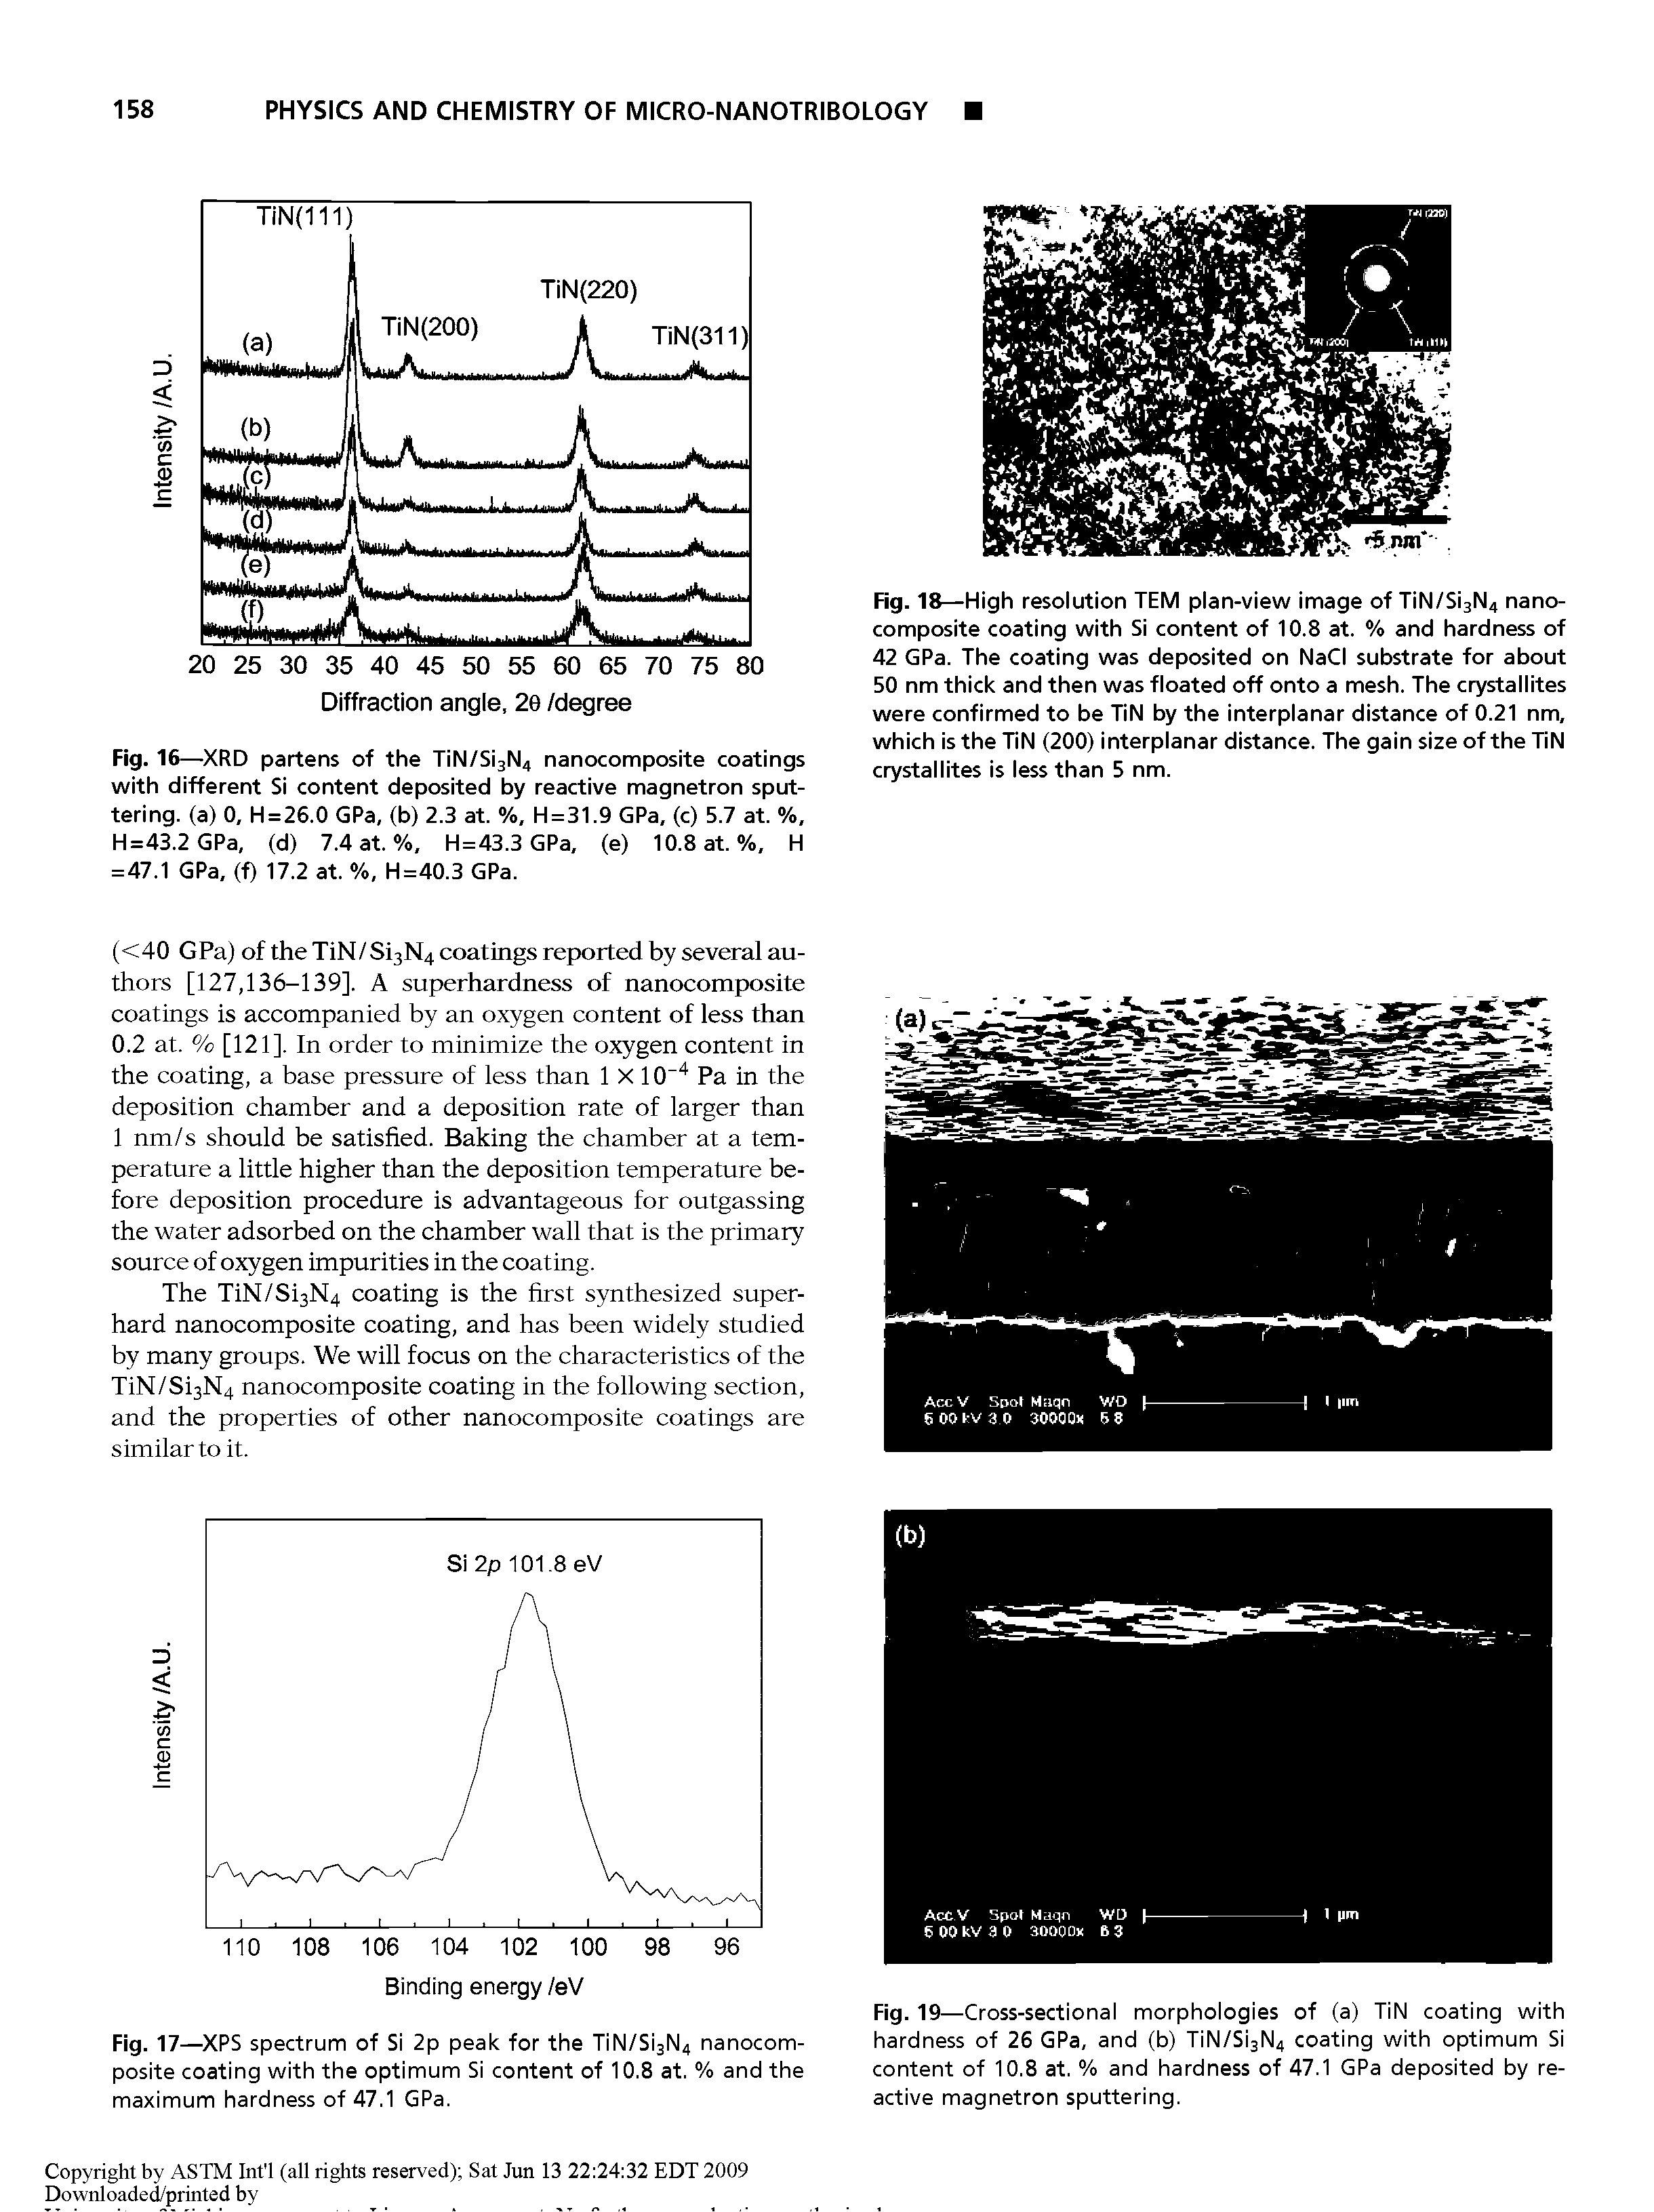 Fig. 18—High resolution TEM plan-view image of TiN/Si3N4 nanocomposite coating with Si content of 10.8 at. % and hardness of 42 GPa. The coating was deposited on NaCI substrate for about 50 nm thick and then was floated off onto a mesh. The crystallites were confirmed to be TIN by the interplanar distance of 0.21 nm, which is the TIN (200) interplanar distance. The gain size of the TiN crystallites is less than 5 nm.